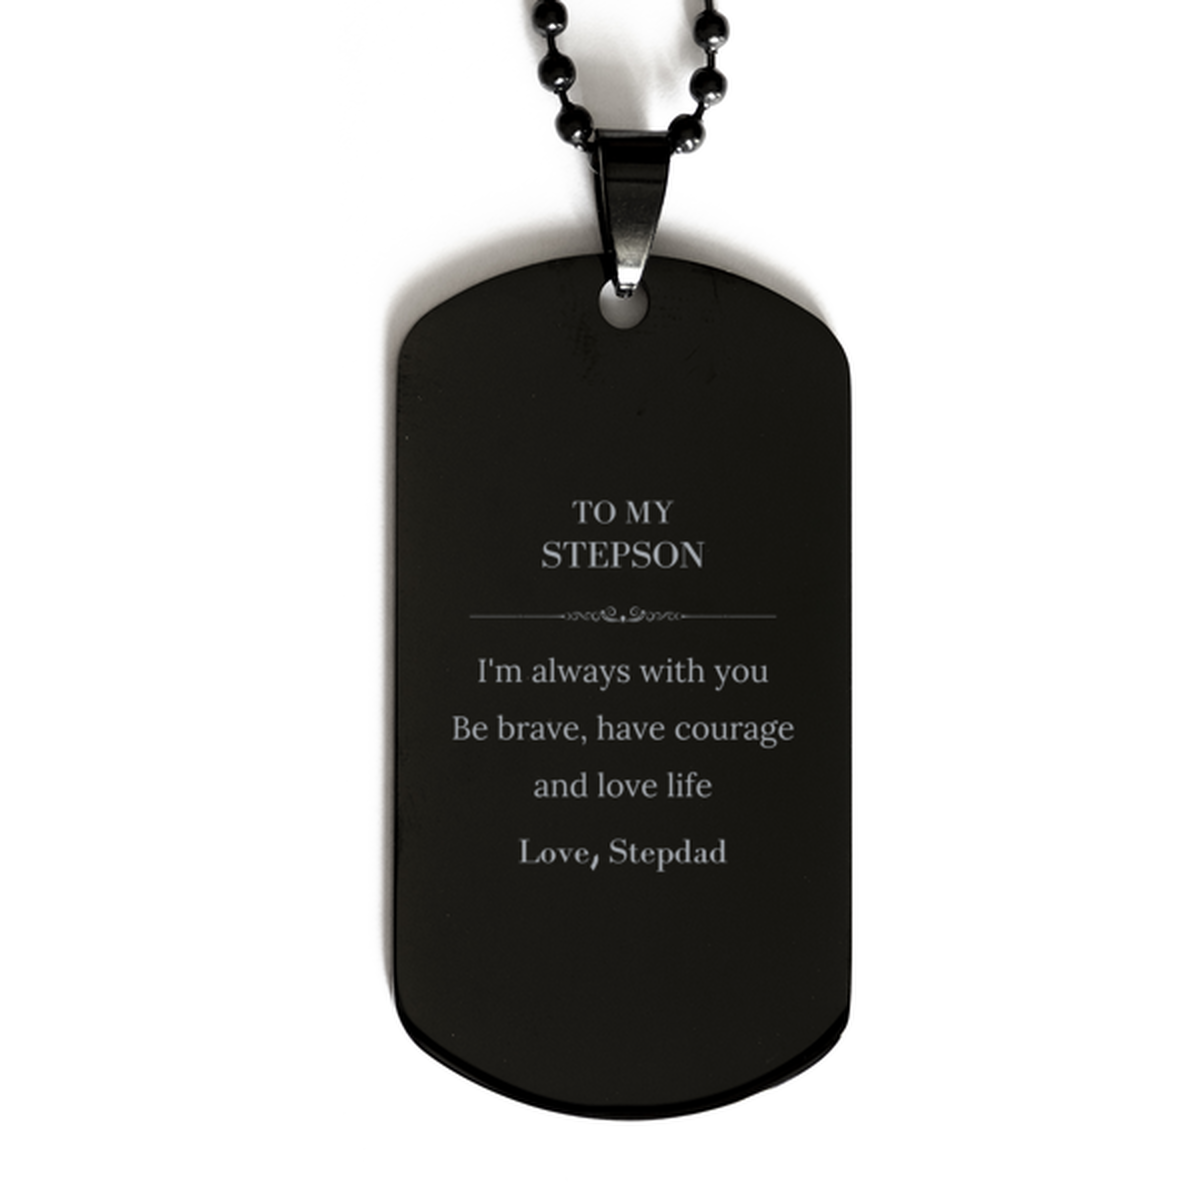 To My Stepson Gifts from Stepdad, Unique Black Dog Tag Inspirational Christmas Birthday Graduation Gifts for Stepson I'm always with you. Be brave, have courage and love life. Love, Stepdad